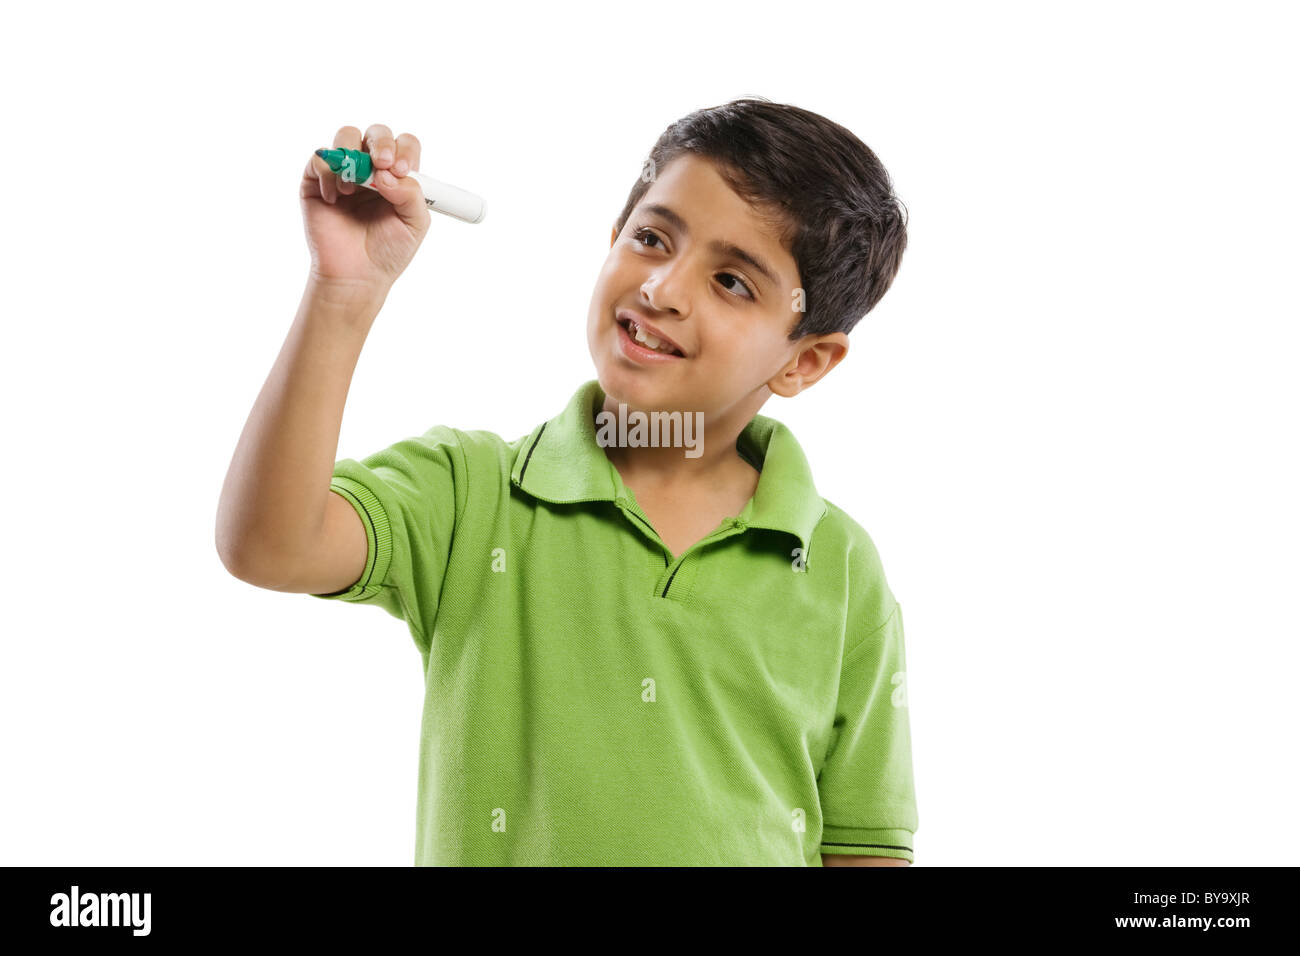 Young boy pretending to write with a marker pen Stock Photo